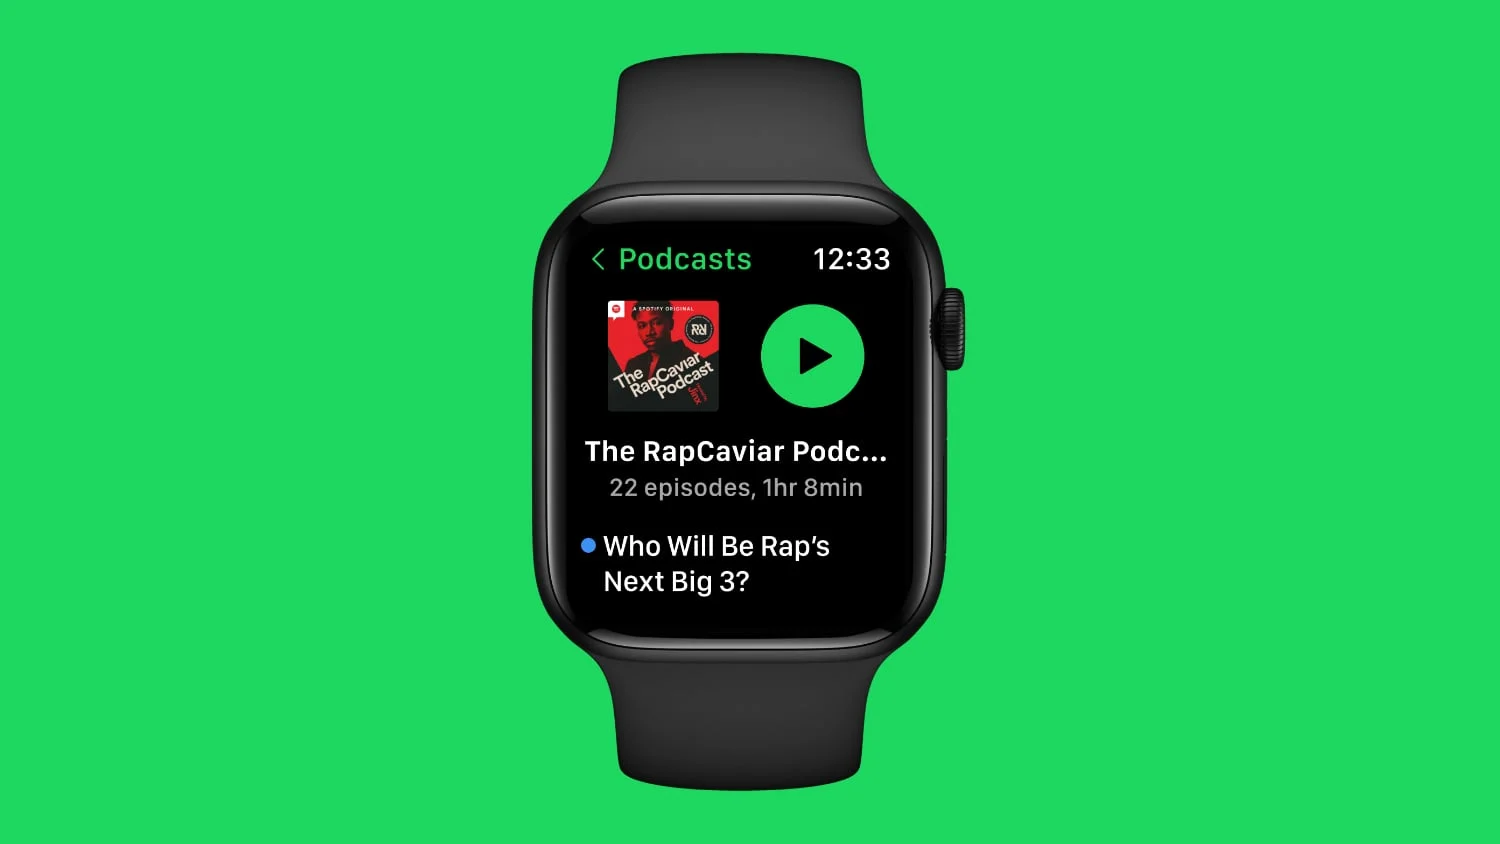 Spotify's watchOS update now lets you pick up where you left off in your favorite podcasts.